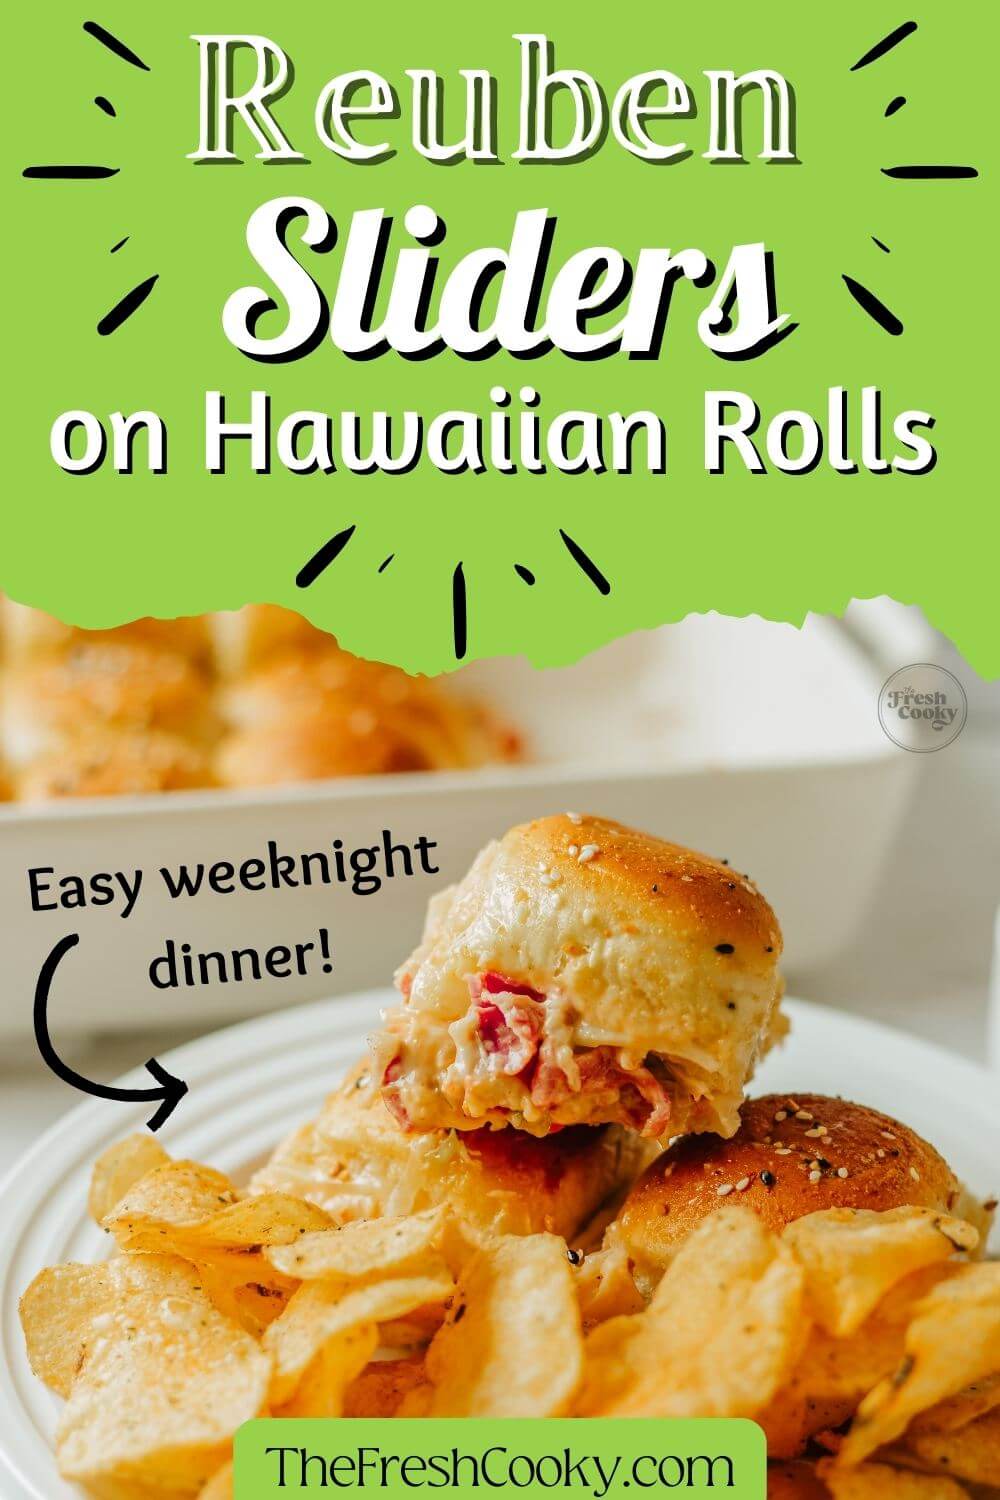 A pan of slider sandwiches on Hawaiian rolls is behind a plate with a stack of sliders, to pin.